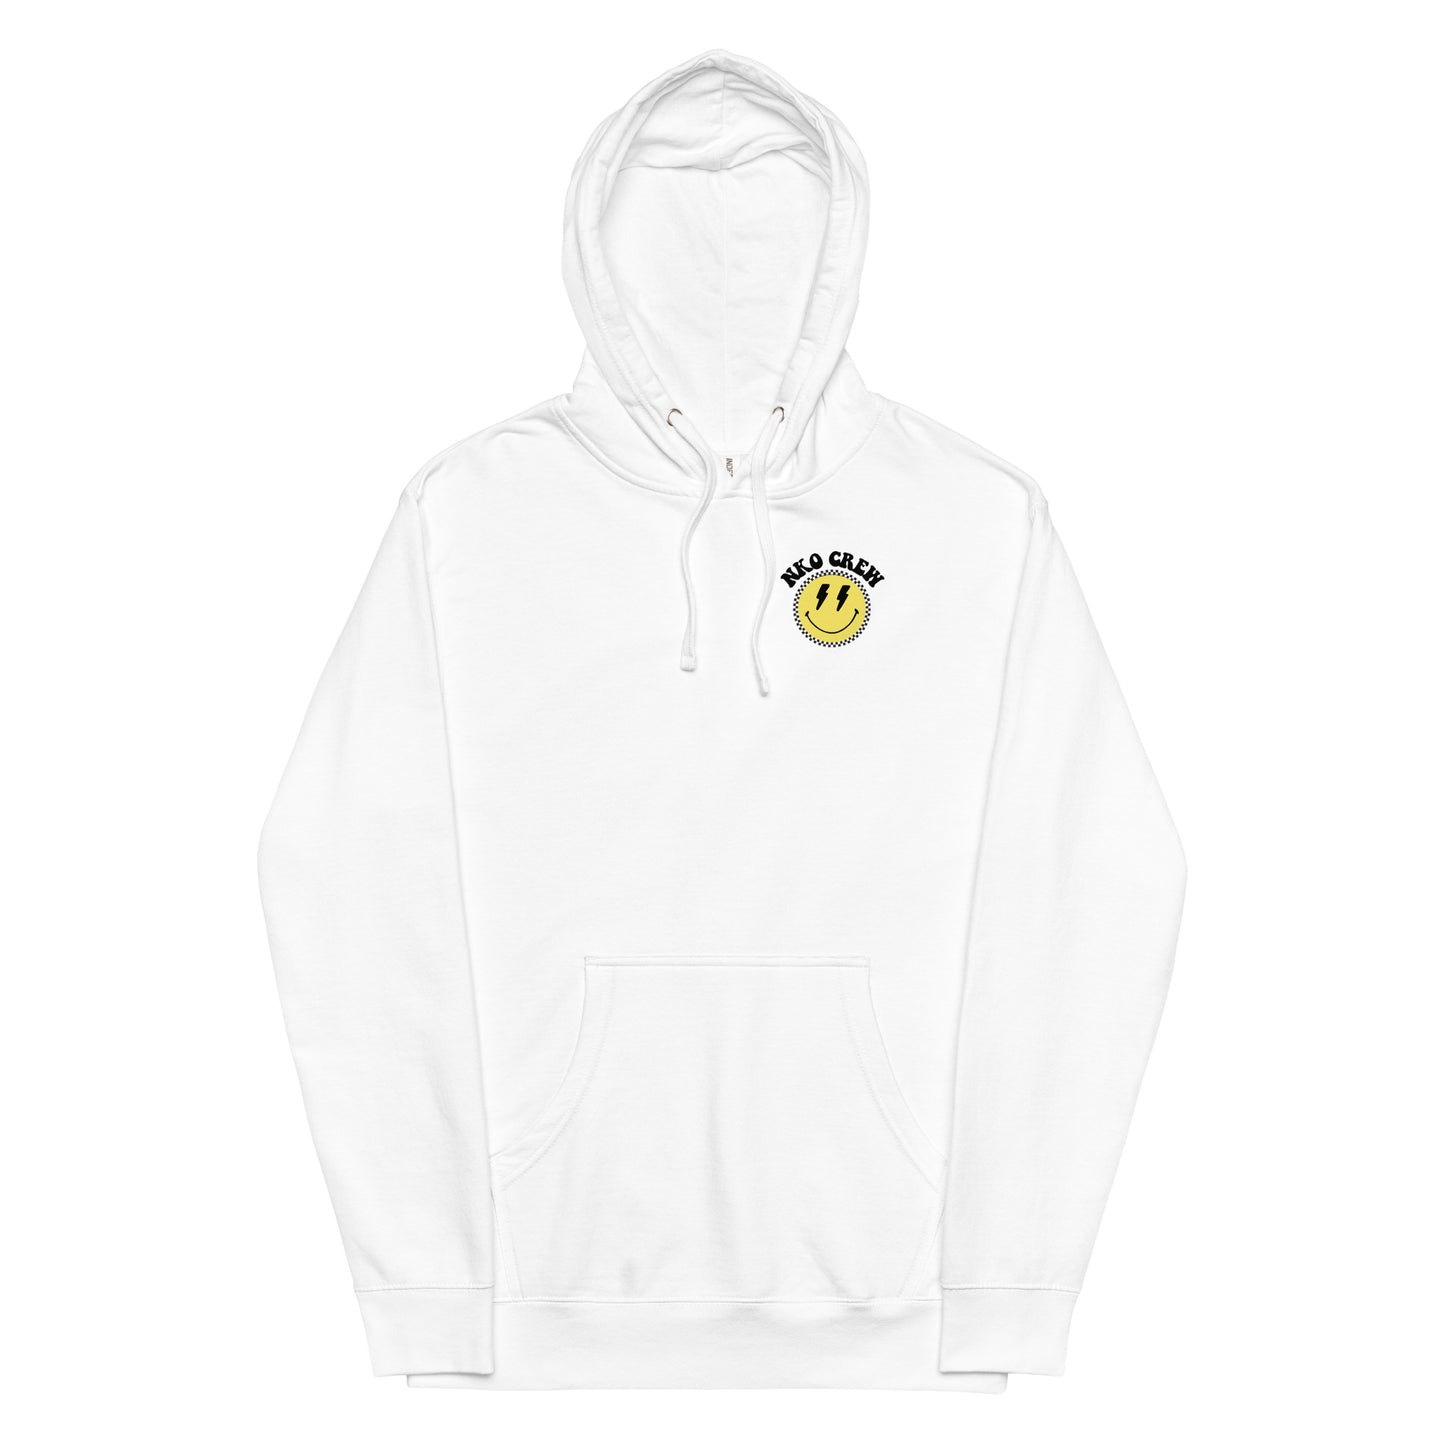 It Was Never a Phase - NKO Crew White Unisex Hoodie